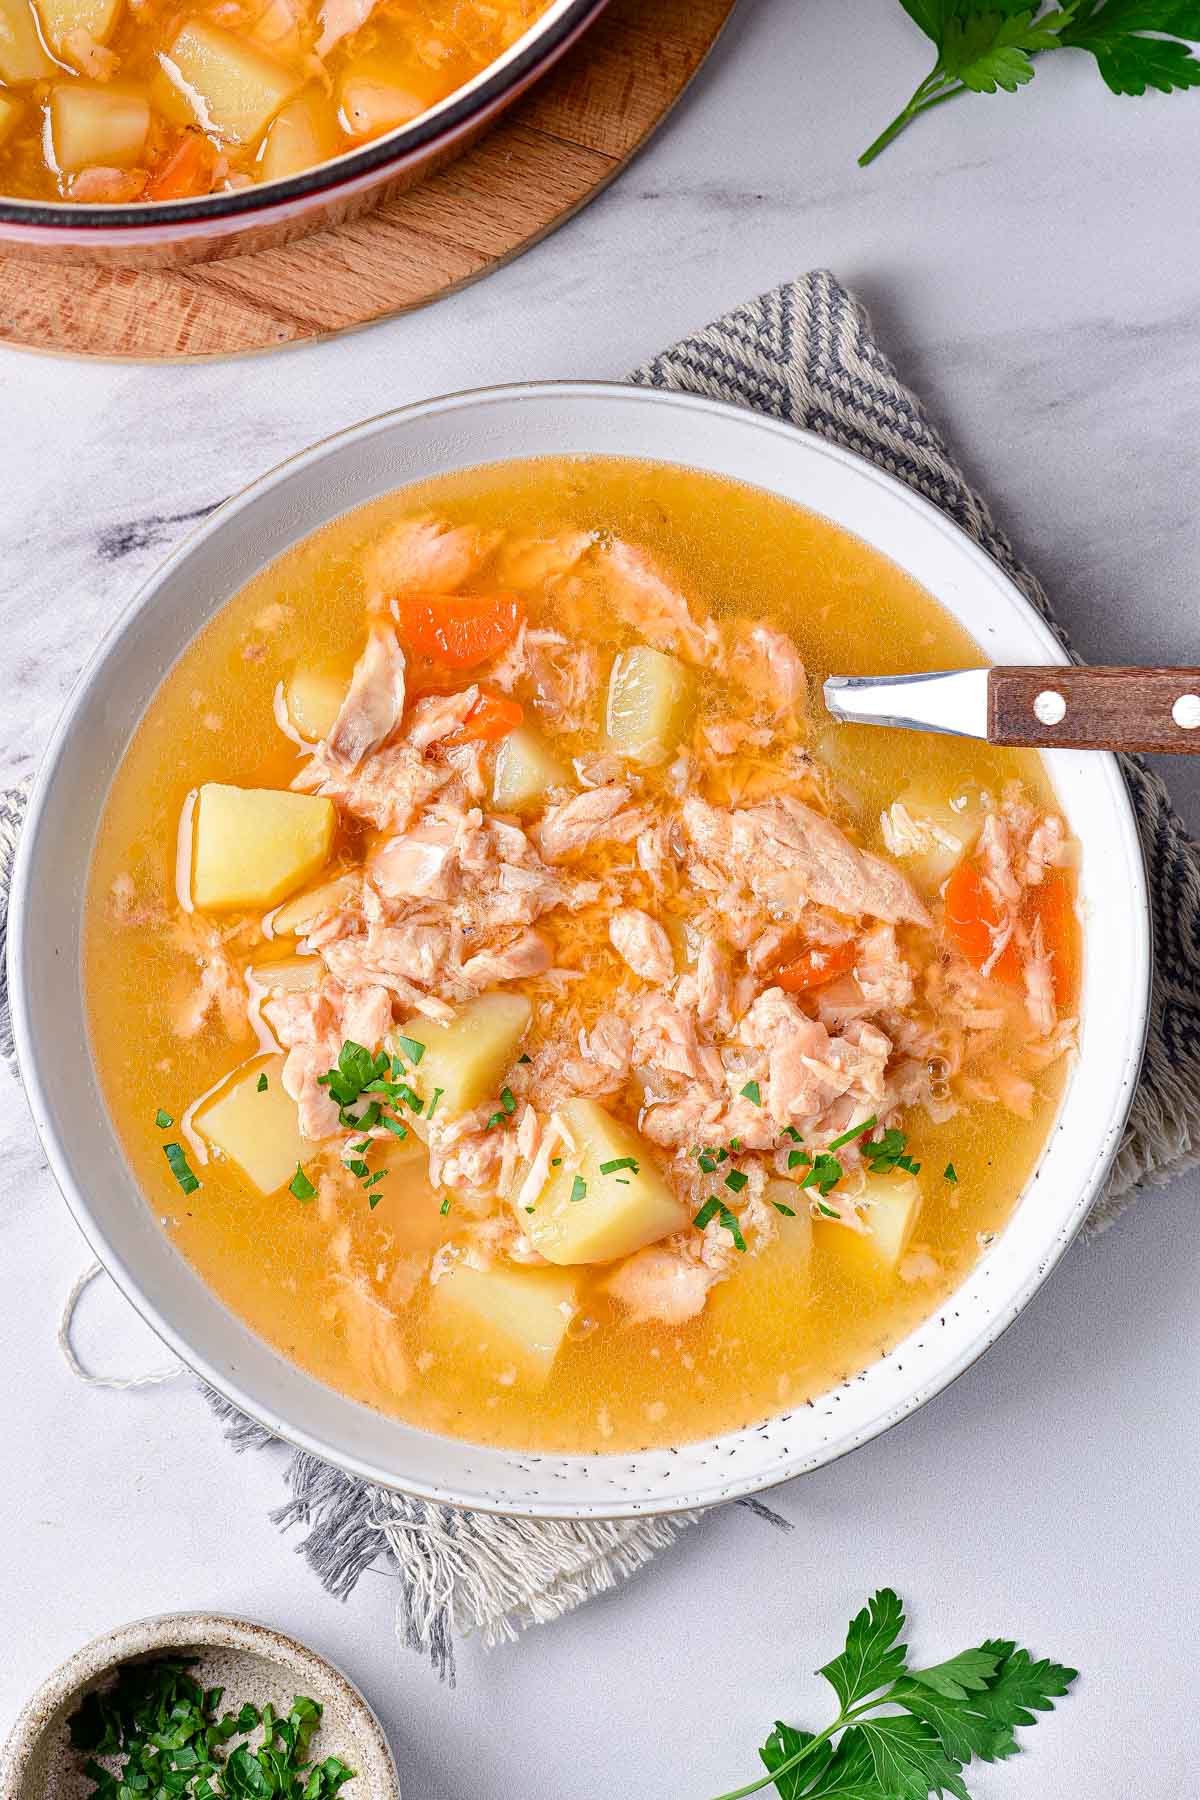 yellow fish soup with salmon and vegetables sitting in white bowl on grey cloth with spoon sticking out.